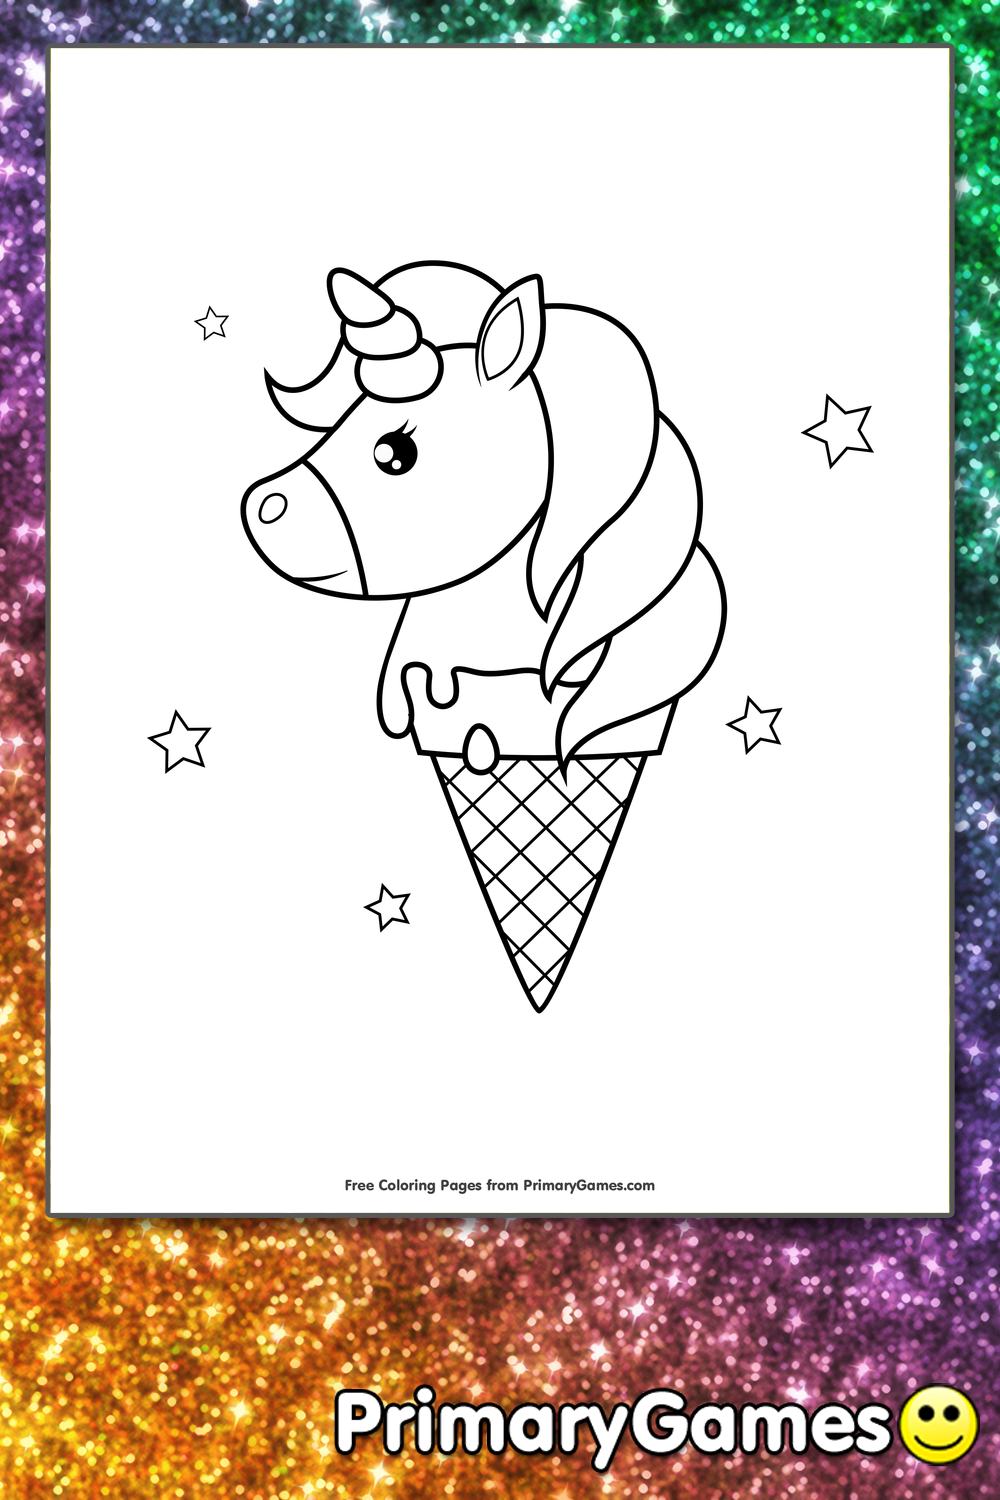 Get Inspired For Unicorn Ice Cream Coloring Pages | AnyOneForAnyaTeam